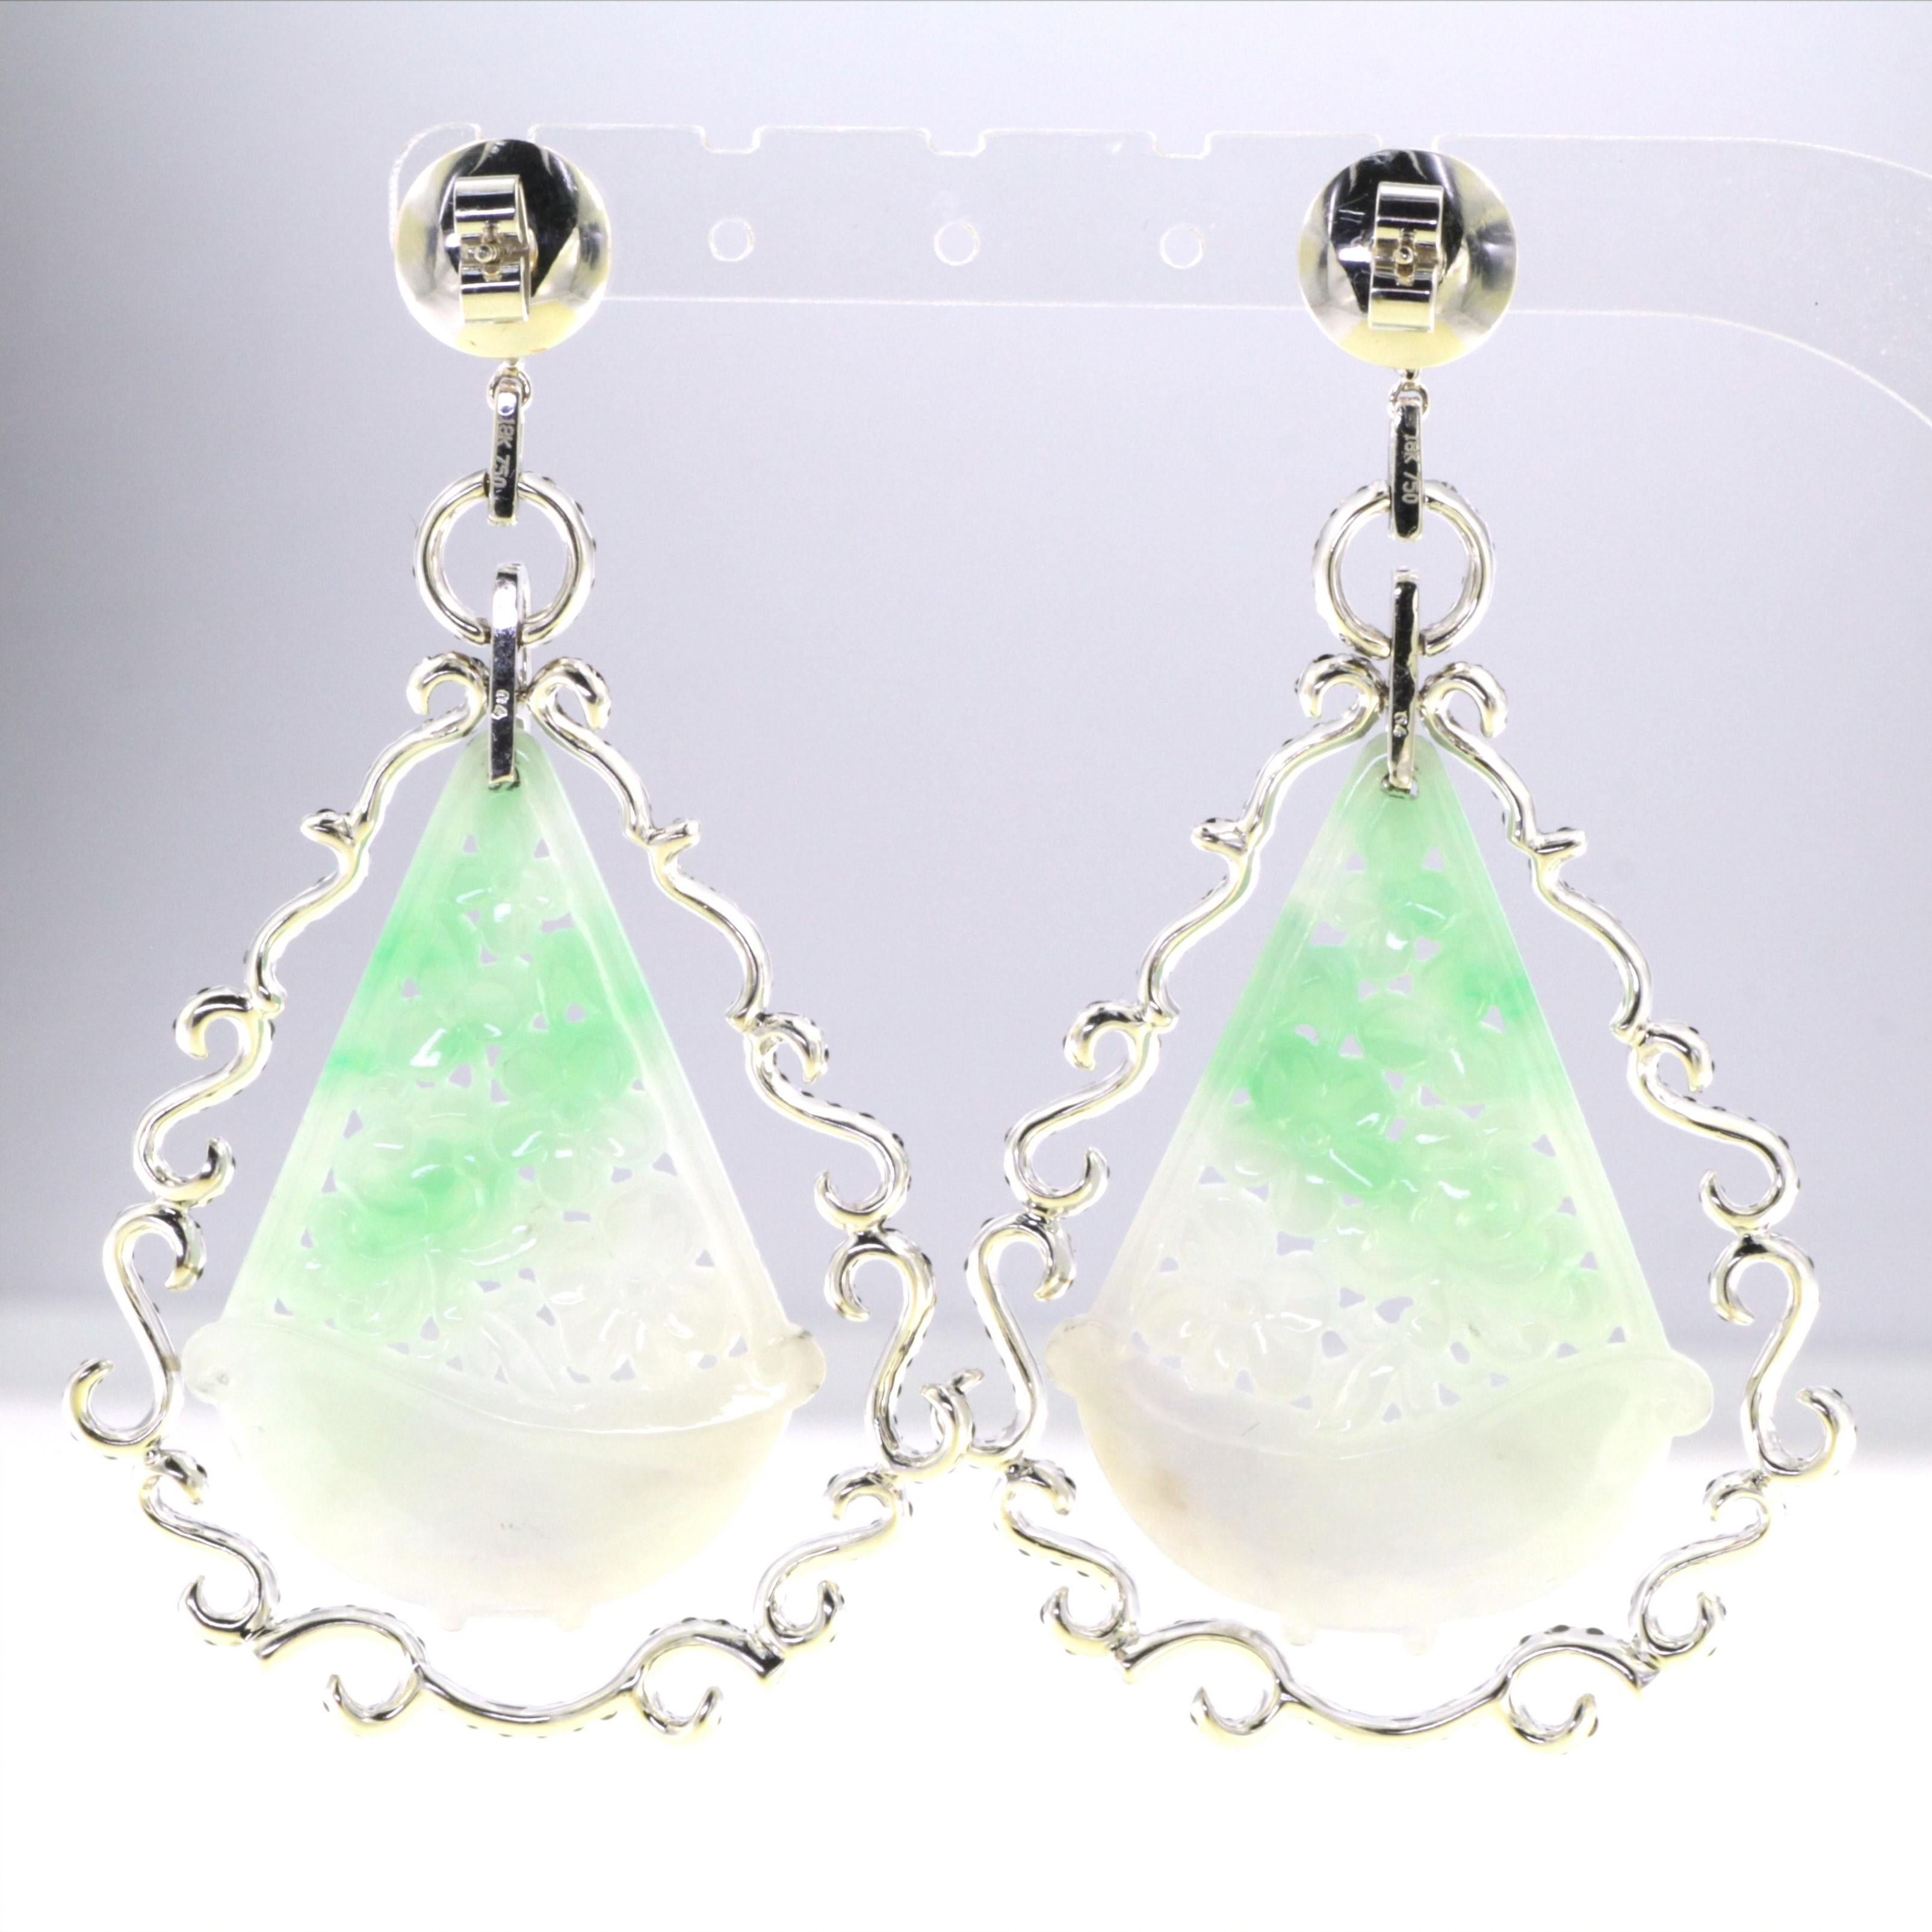 Introducing our stunning Art Deco jadeite and diamond drop earrings, a mesmerizing pair that perfectly blends vintage charm with contemporary elegance. Crafted in 18 karat white gold, these earrings are a true testament to exquisite craftsmanship